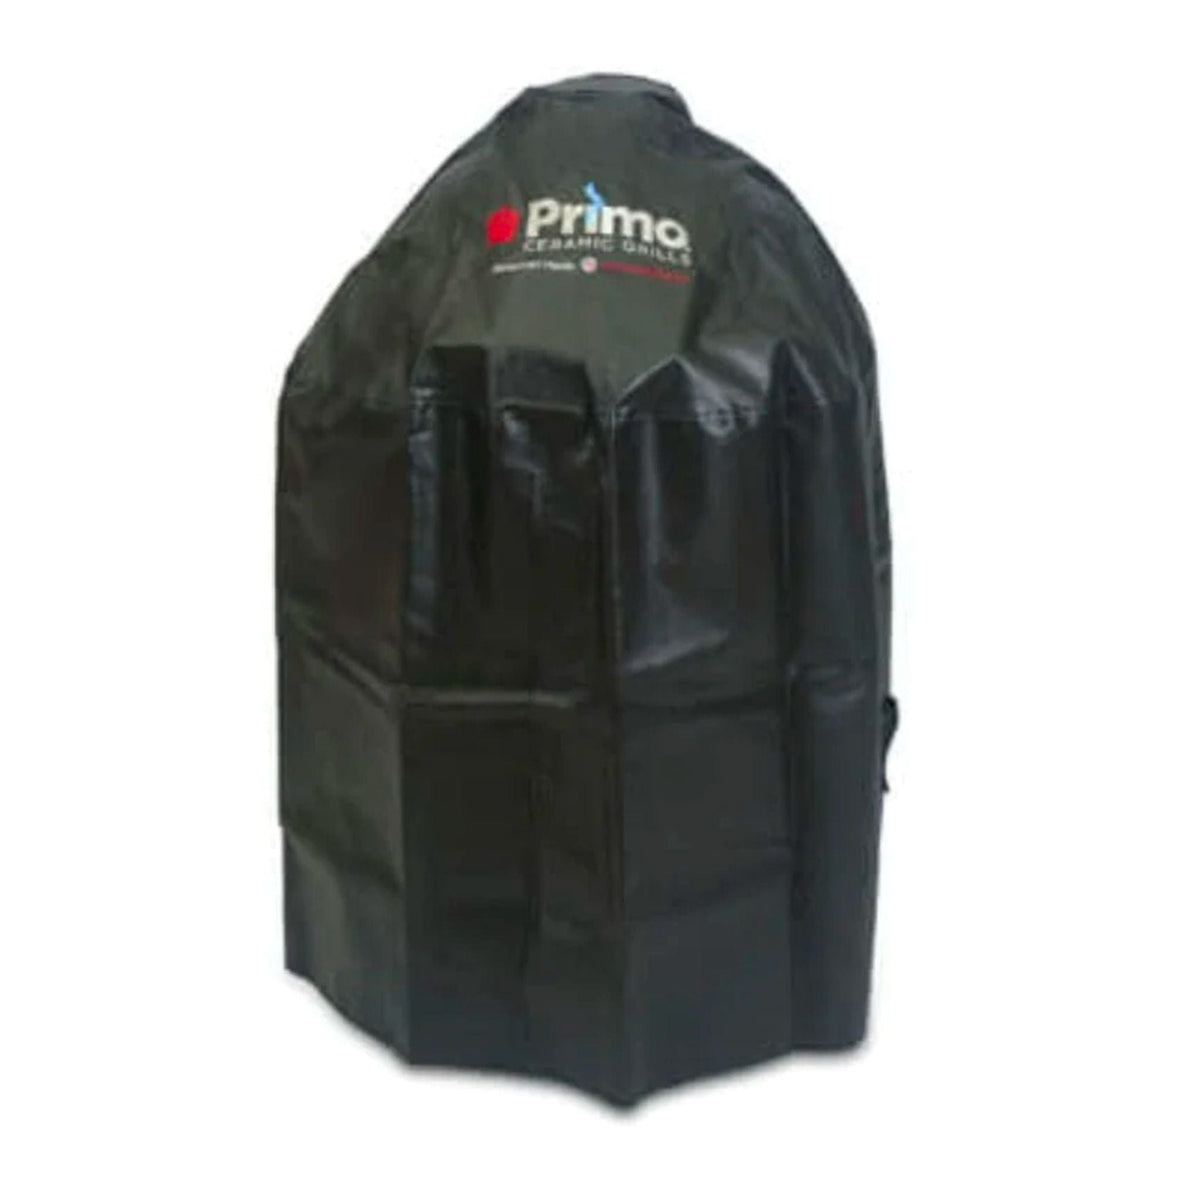 Primo Grill Cover for all Oval Grills in Built-in Applications